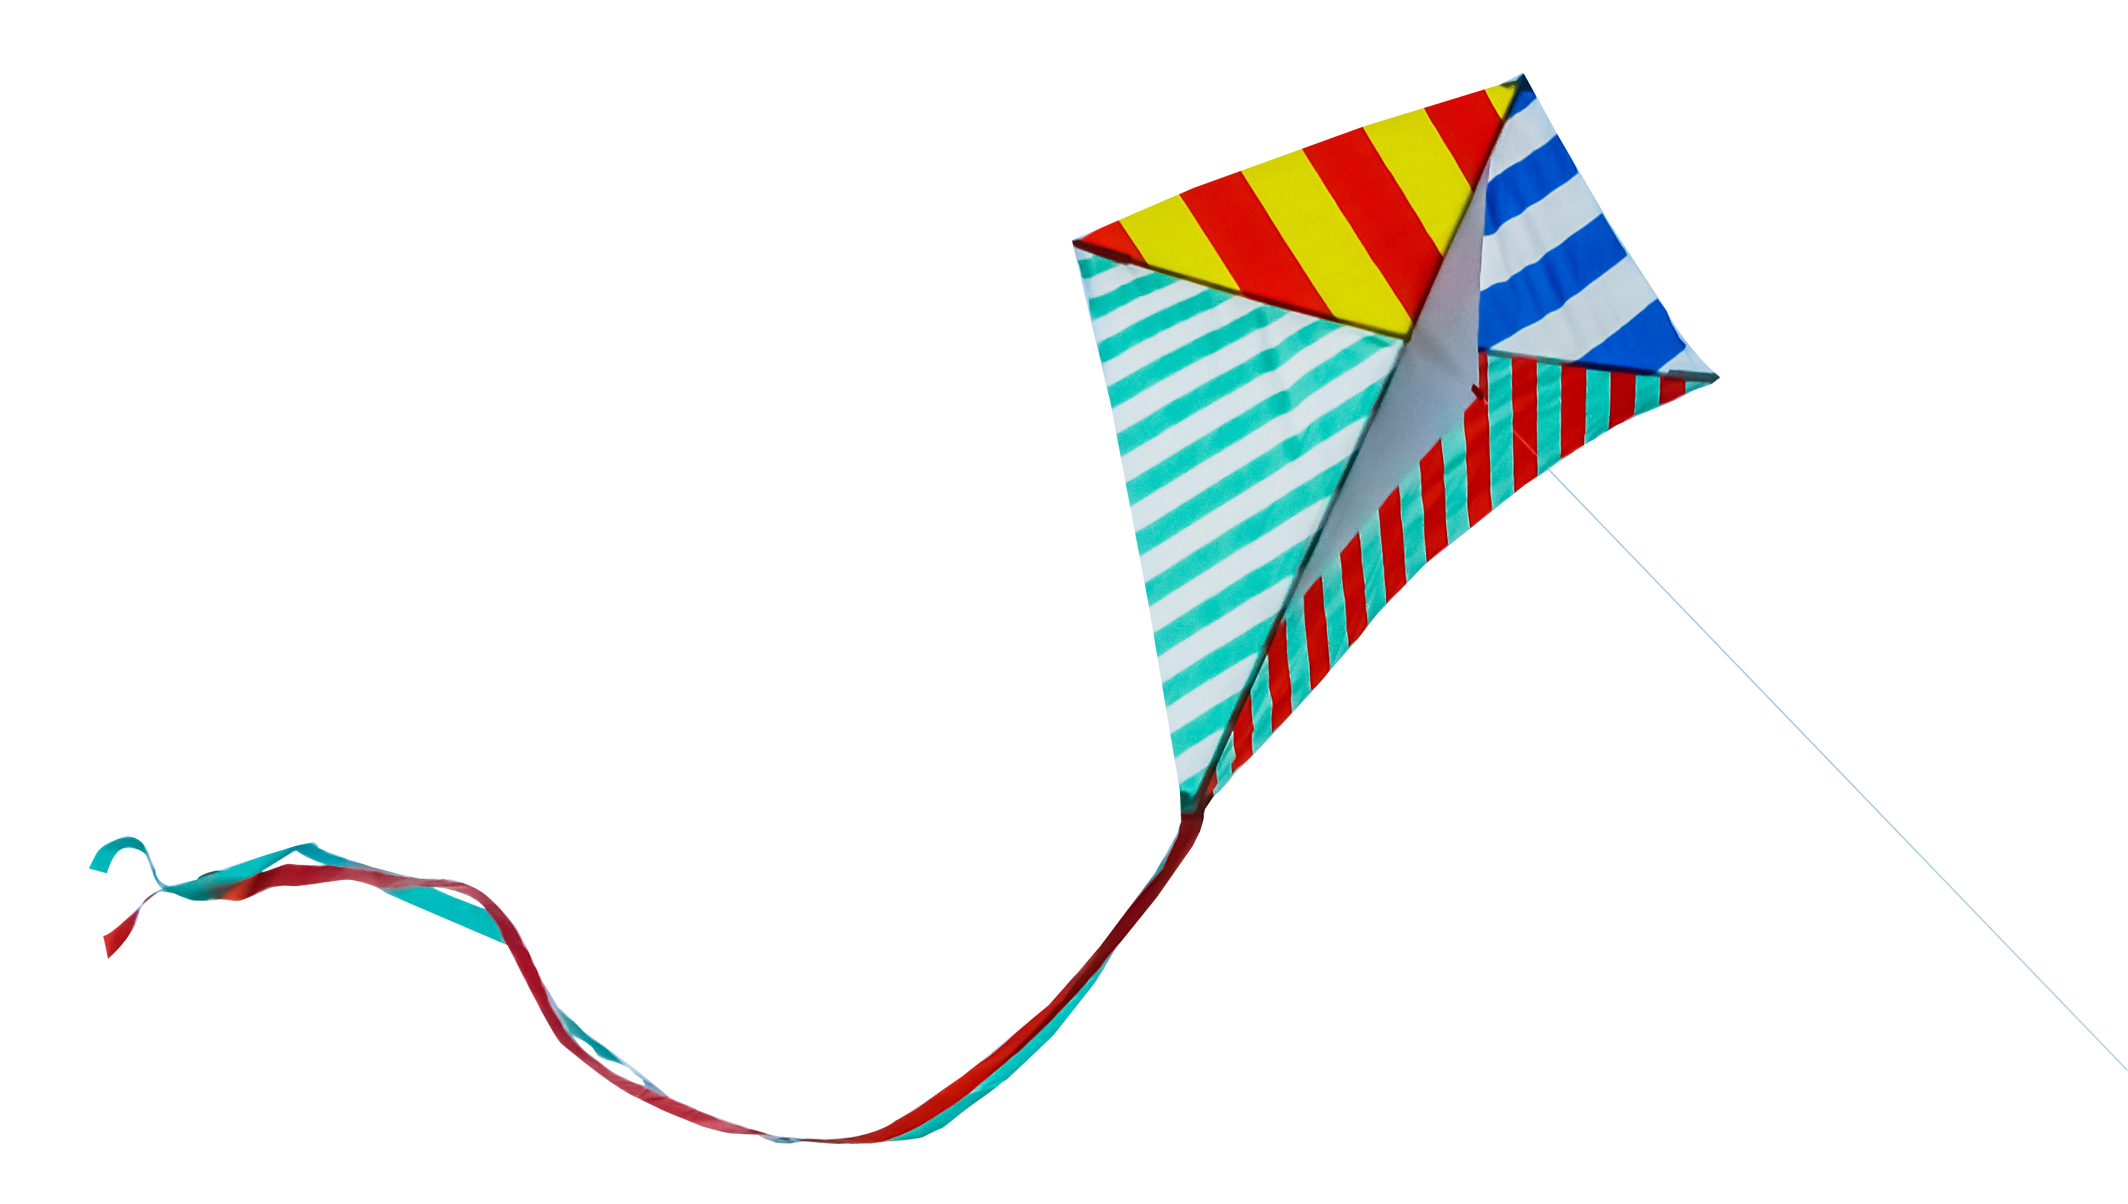 All Kite Png - Download transparent kite png for free on pngkey.com.